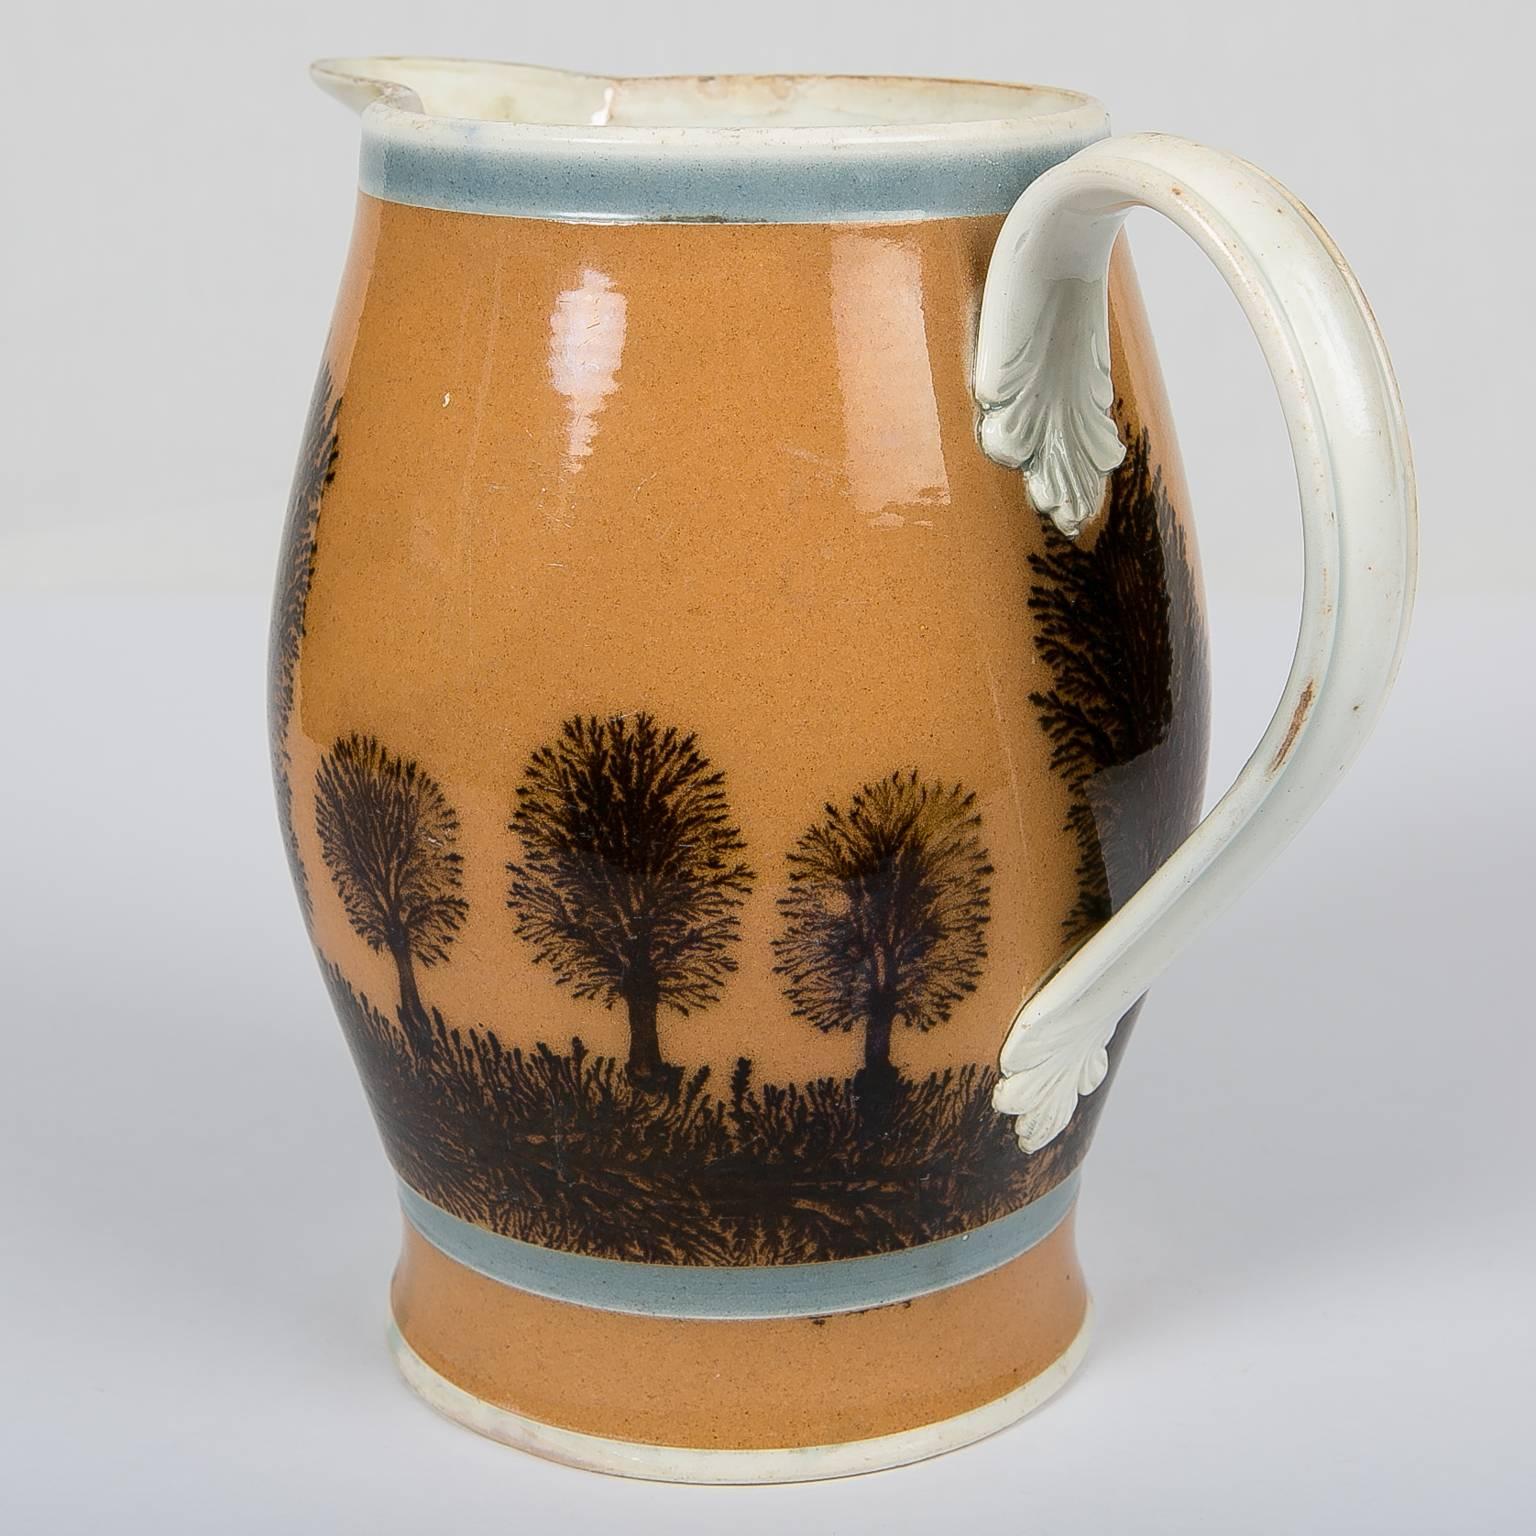 An exceptional Mochaware jug with a wide band of light burnt orange slip molded in an elegant tall shape and decorated with vertical tree-like dendritic designs rising from a horizontal dendritic design of 